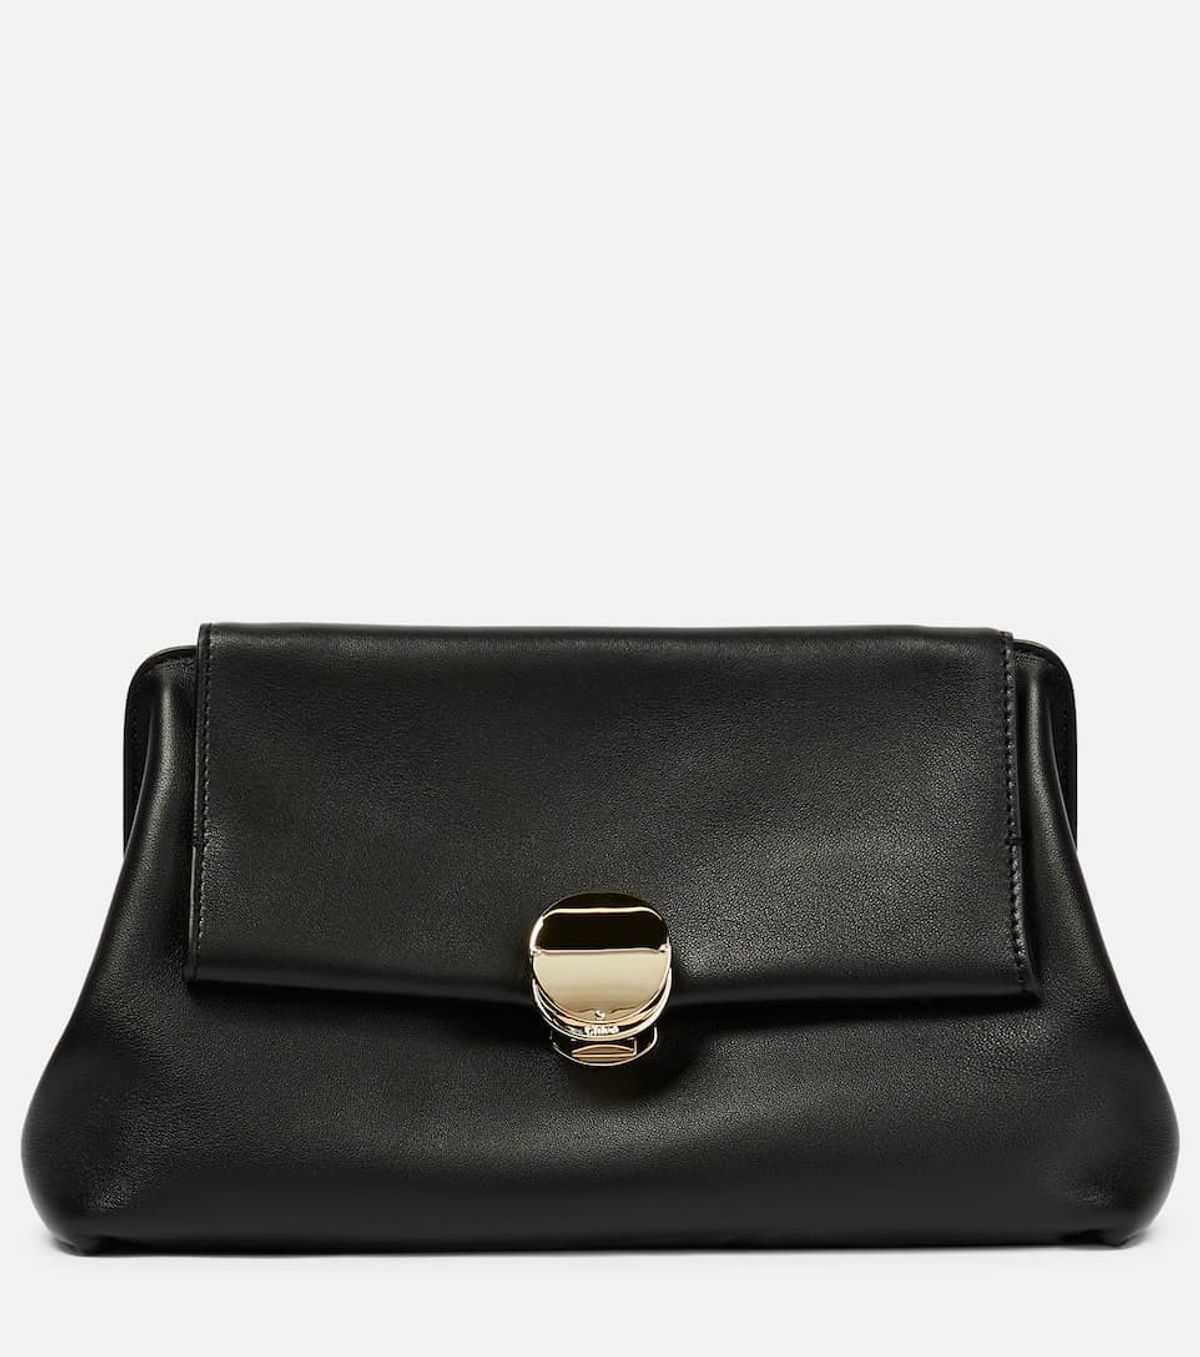 Chloé Penelope Small Leather Clutch